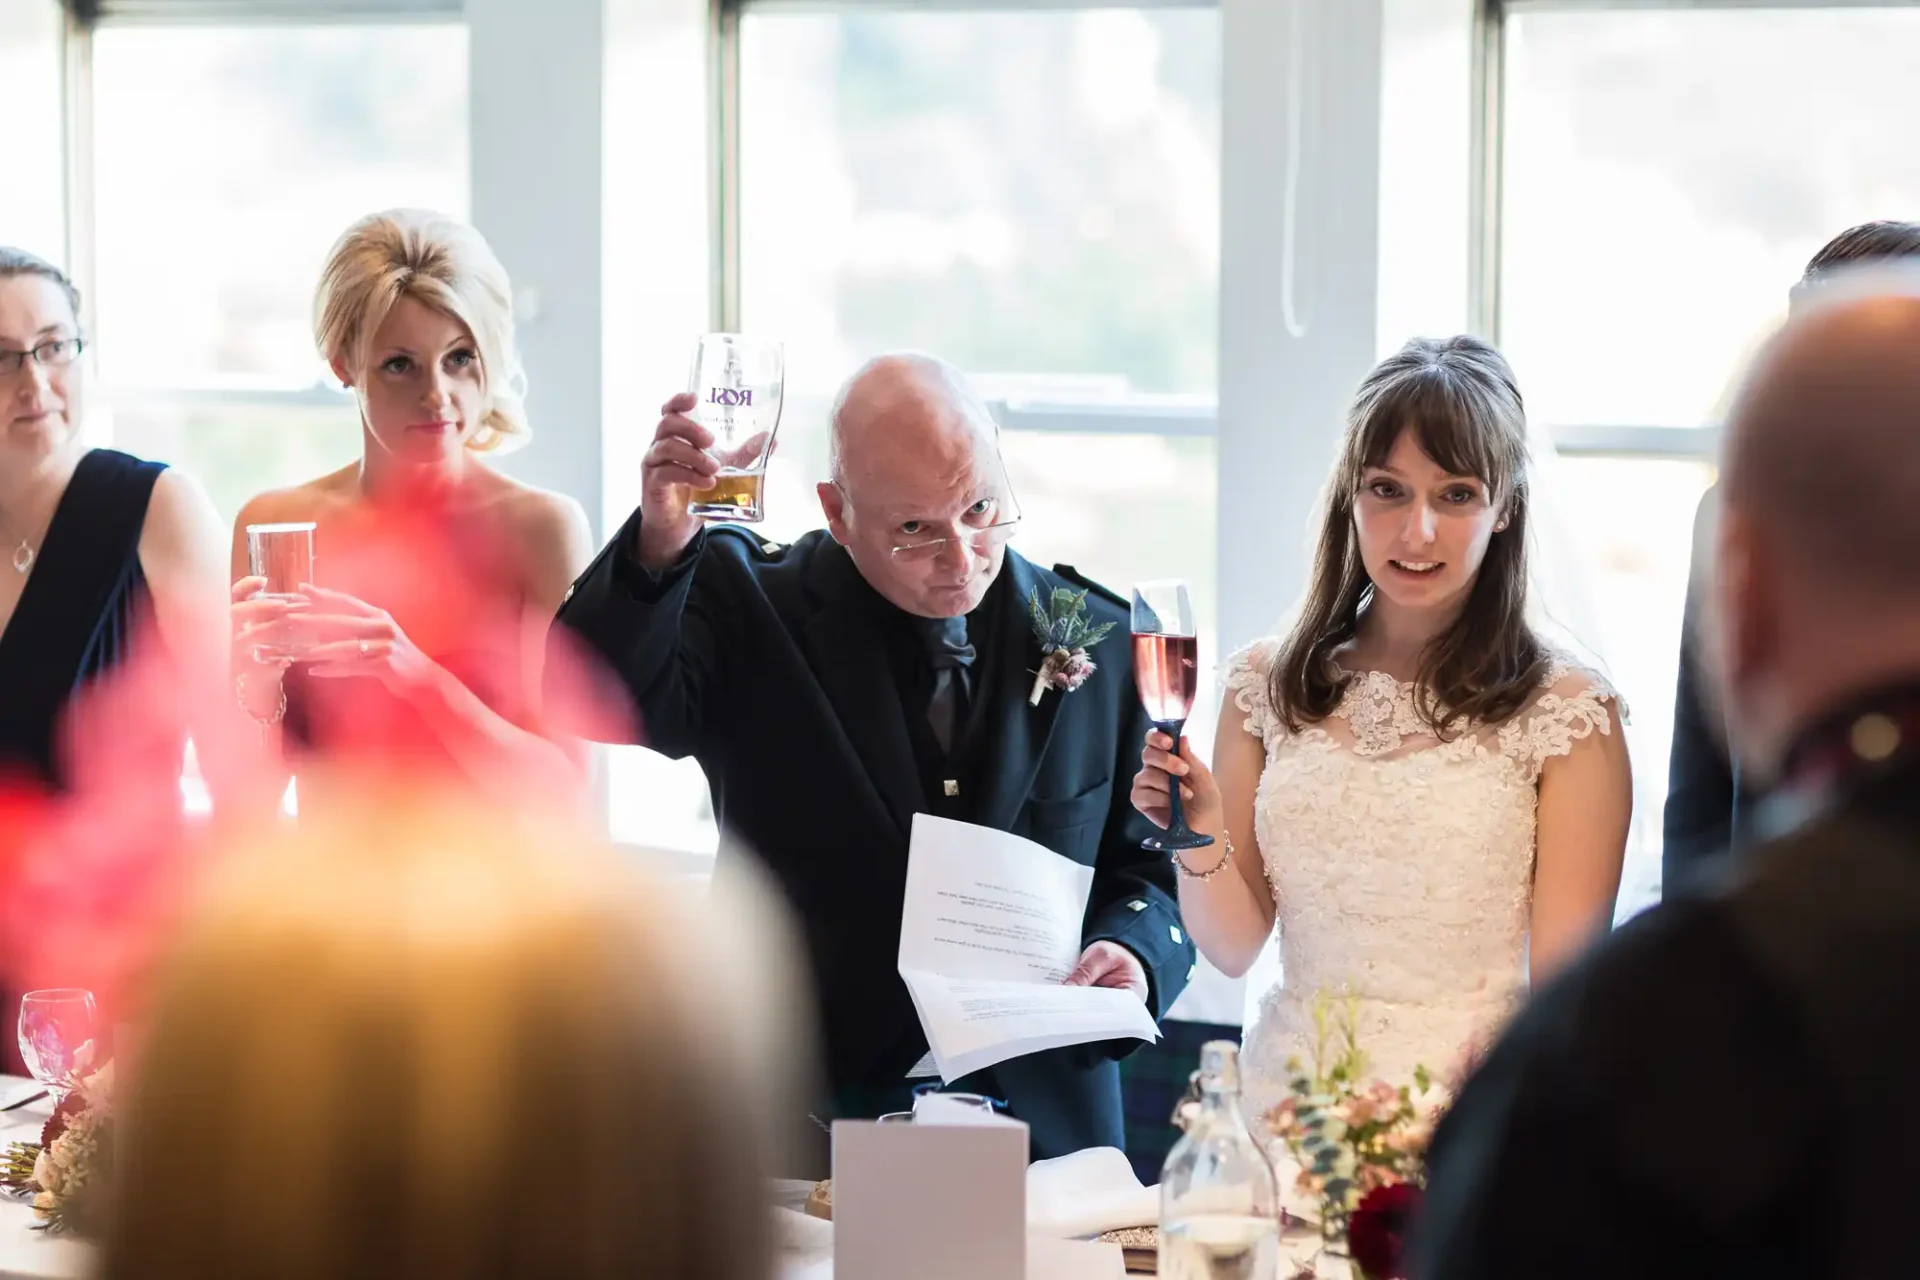 A bride and an older man raise their glasses for a toast at a wedding reception, observed by seated guests.